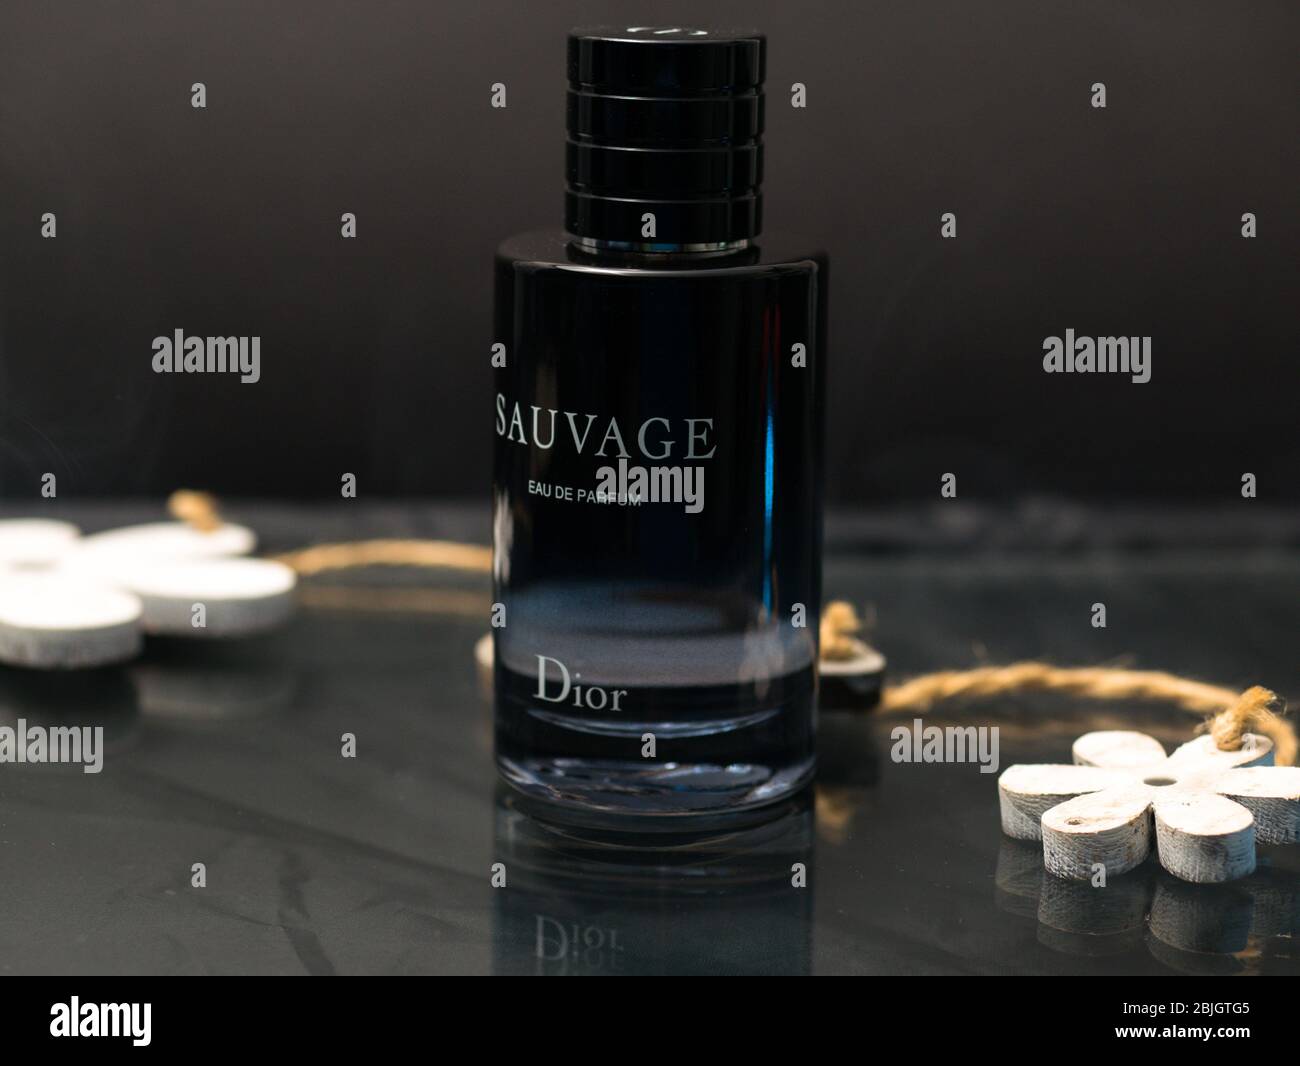 SAUVAGE Parfum by Dior. Aftershave Perfume Fragrance for Men by French ...